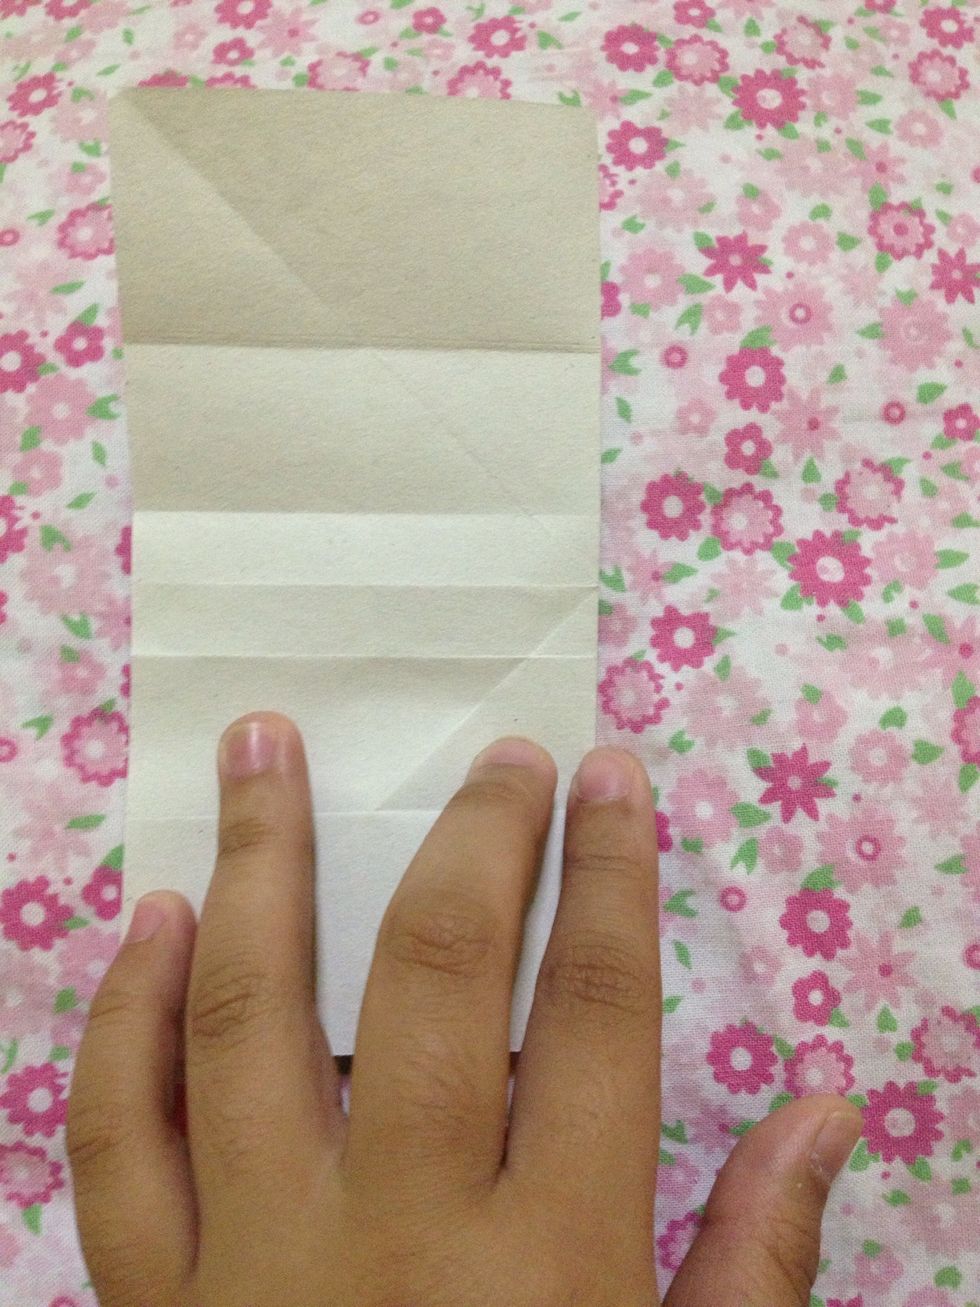 Fold in half sideways. Fold this (where my index finger is pointing) part 1/3 to the left. And unfold.